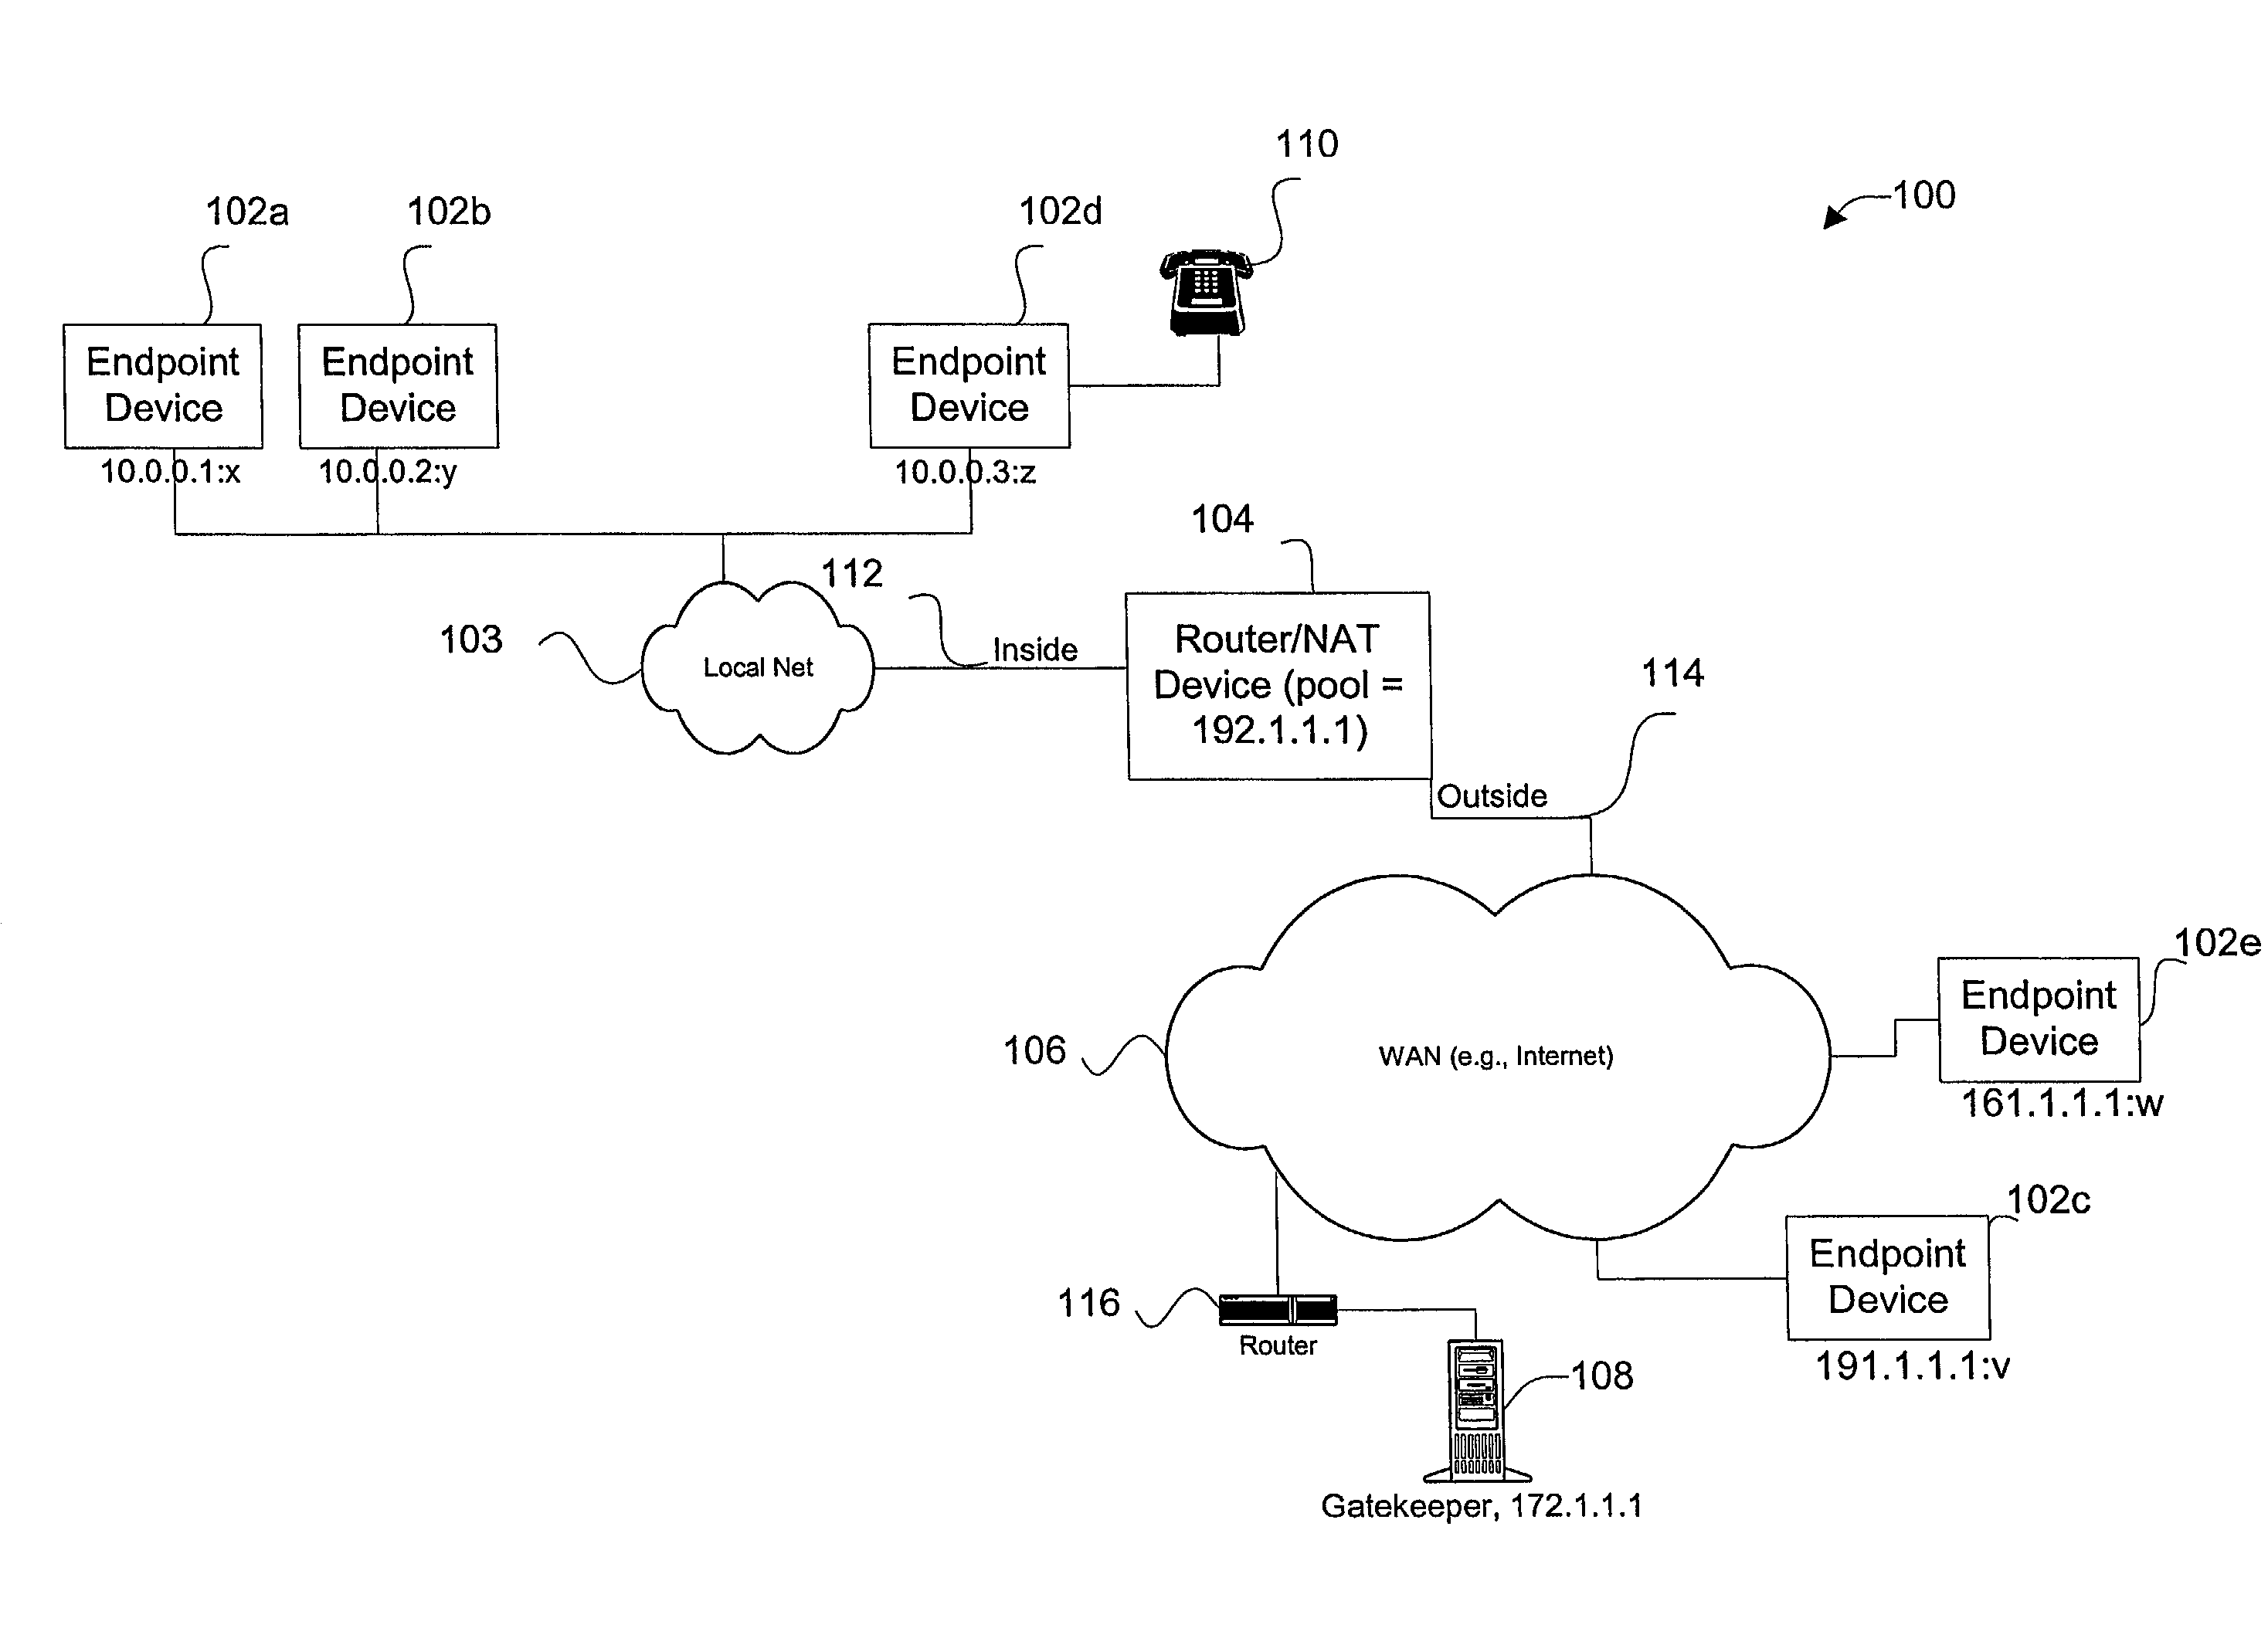 Apparatus and methods for maintaining the registration state of an IP device in a network address port translation (NAPT) environment